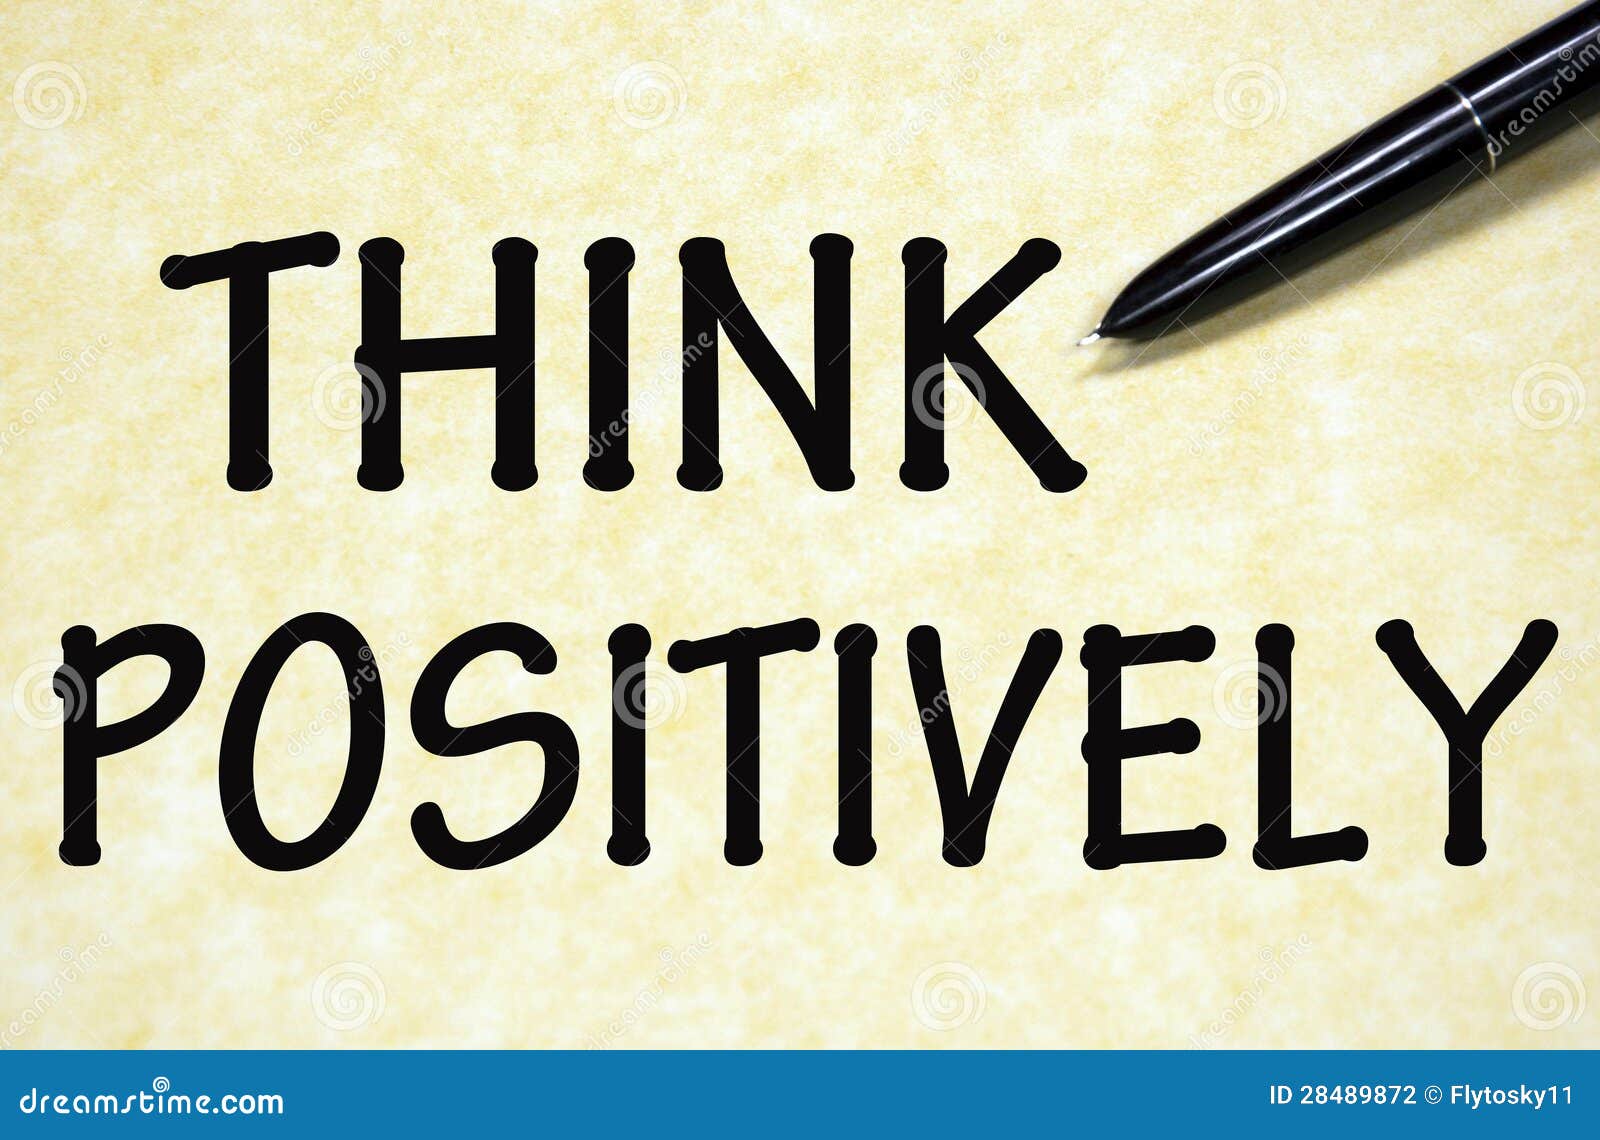 think positively 